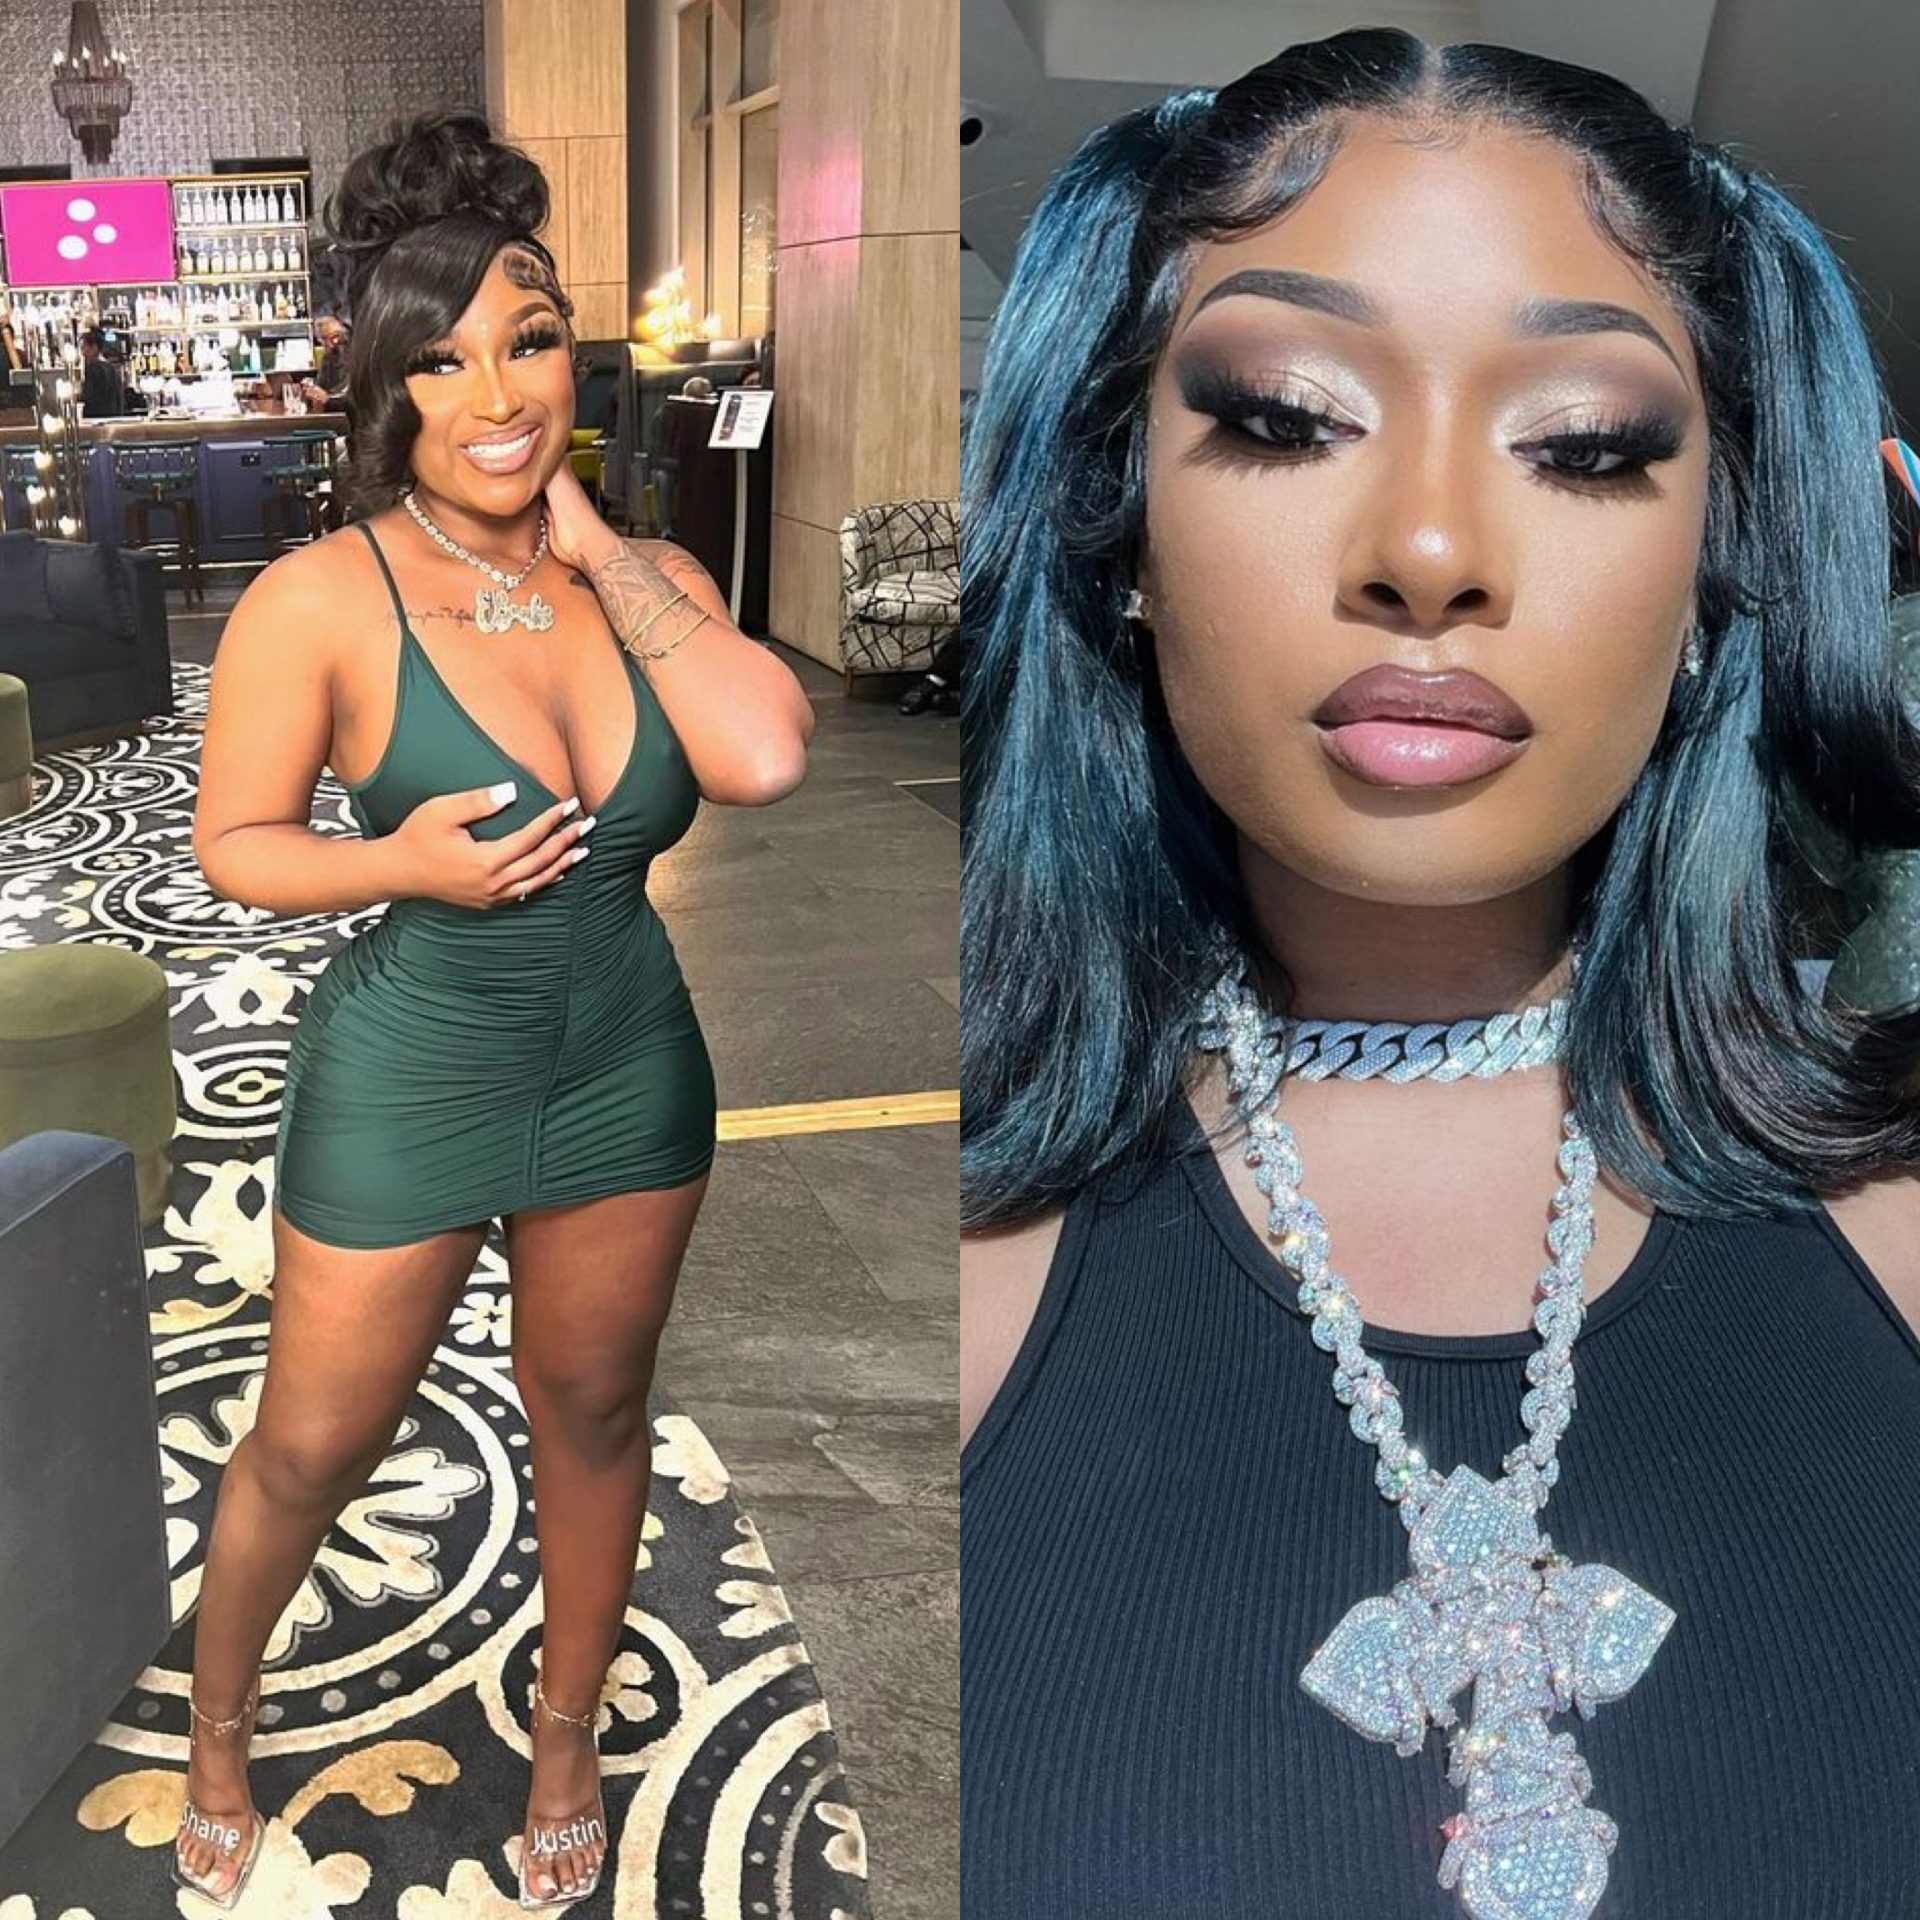 People Online Call Out Erica Banks For Copying Megan Thee Stallion